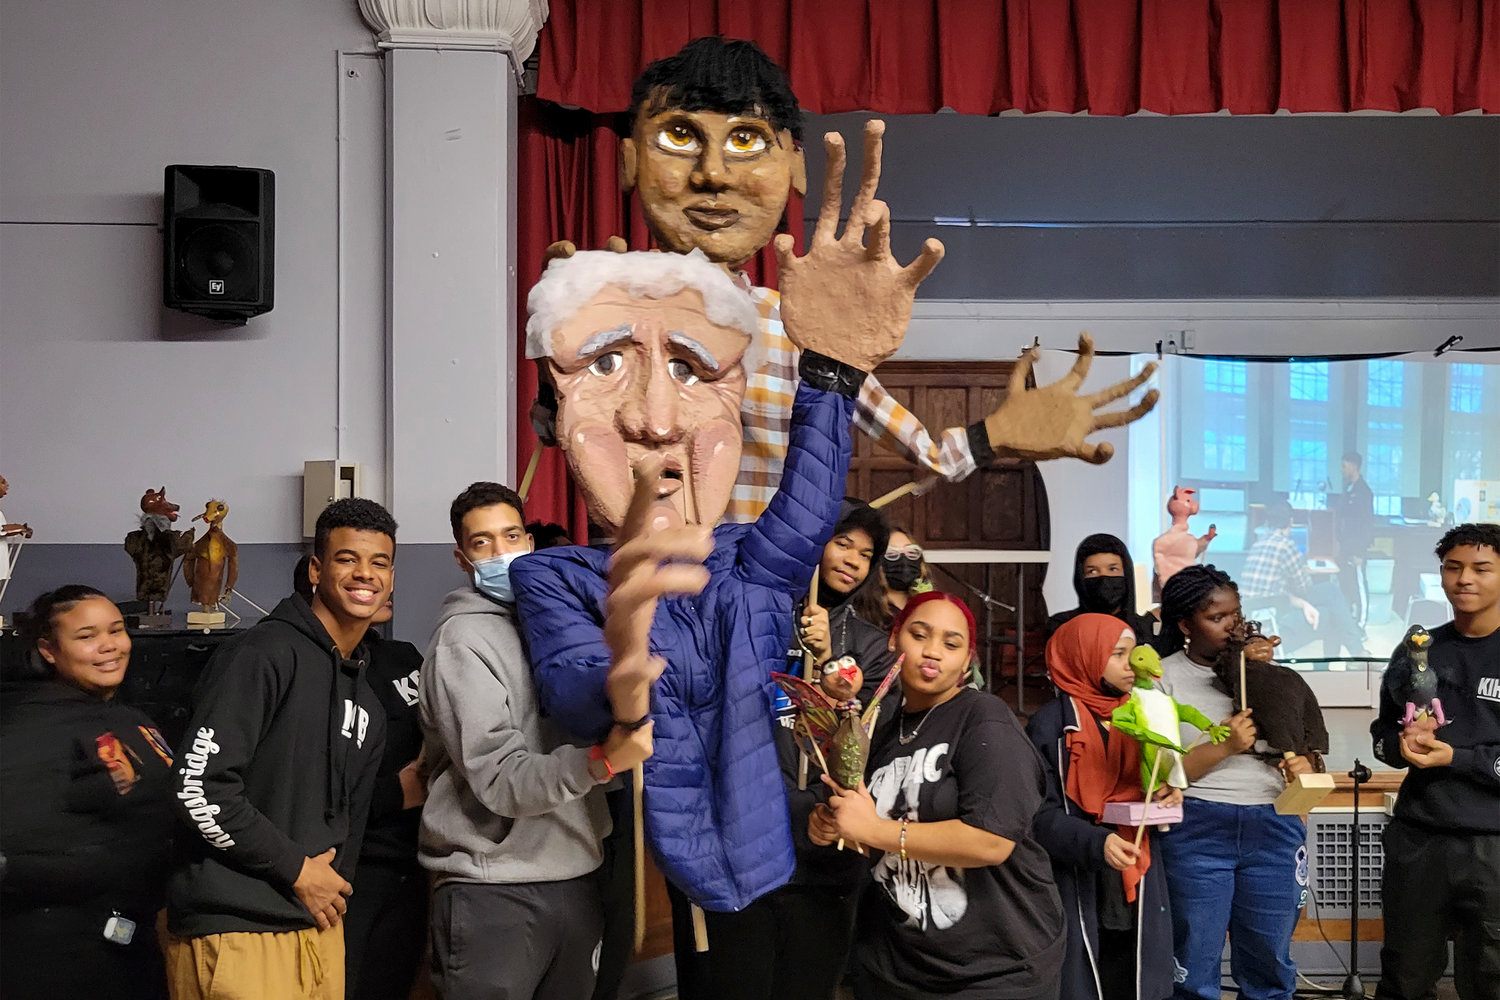 Two large puppets were presented in front of P.S. 65 elementary school students and teachers by students from Kingsbridge International High School.